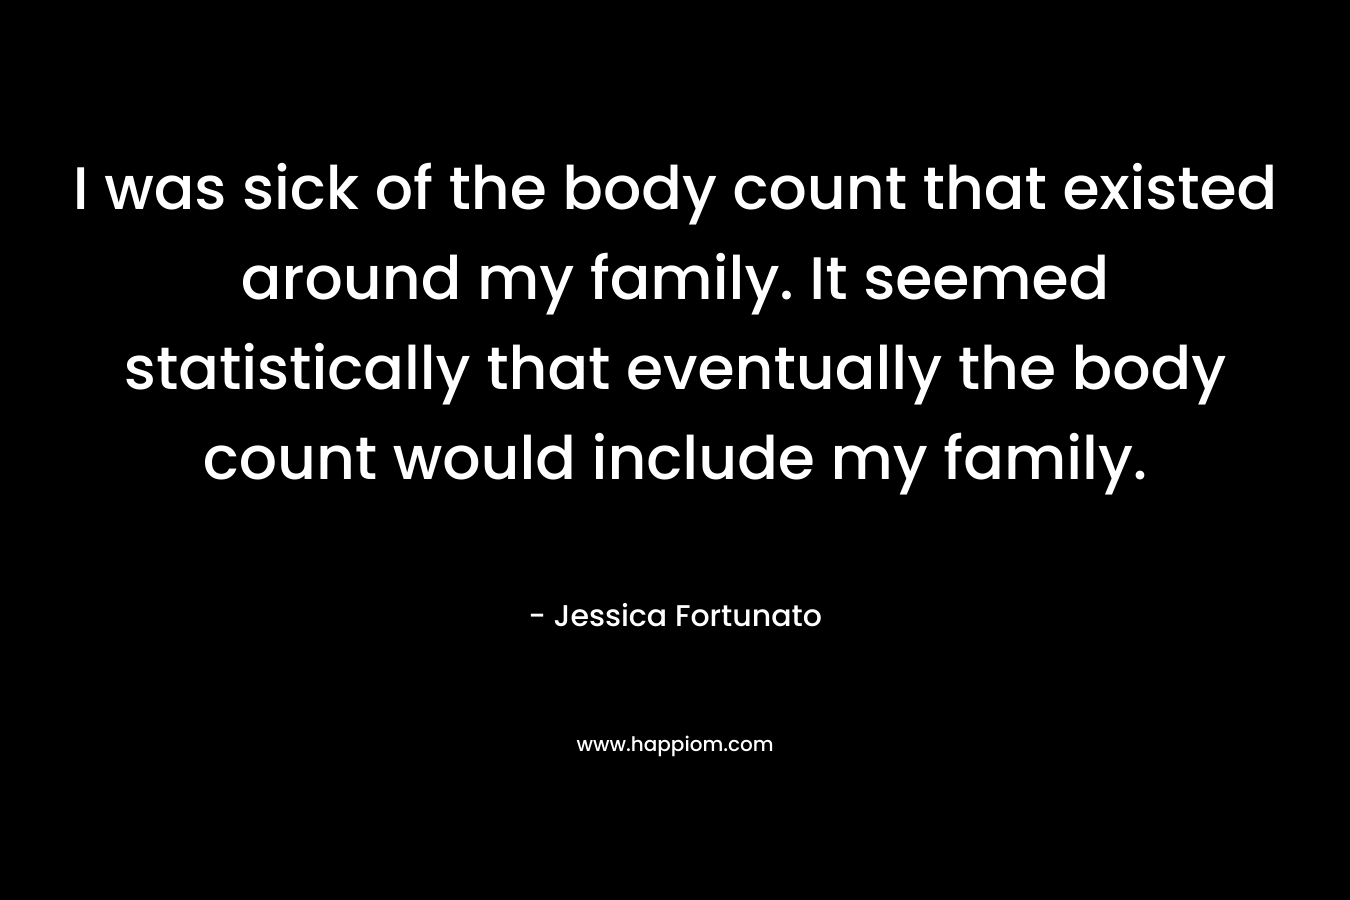 I was sick of the body count that existed around my family. It seemed statistically that eventually the body count would include my family. – Jessica Fortunato